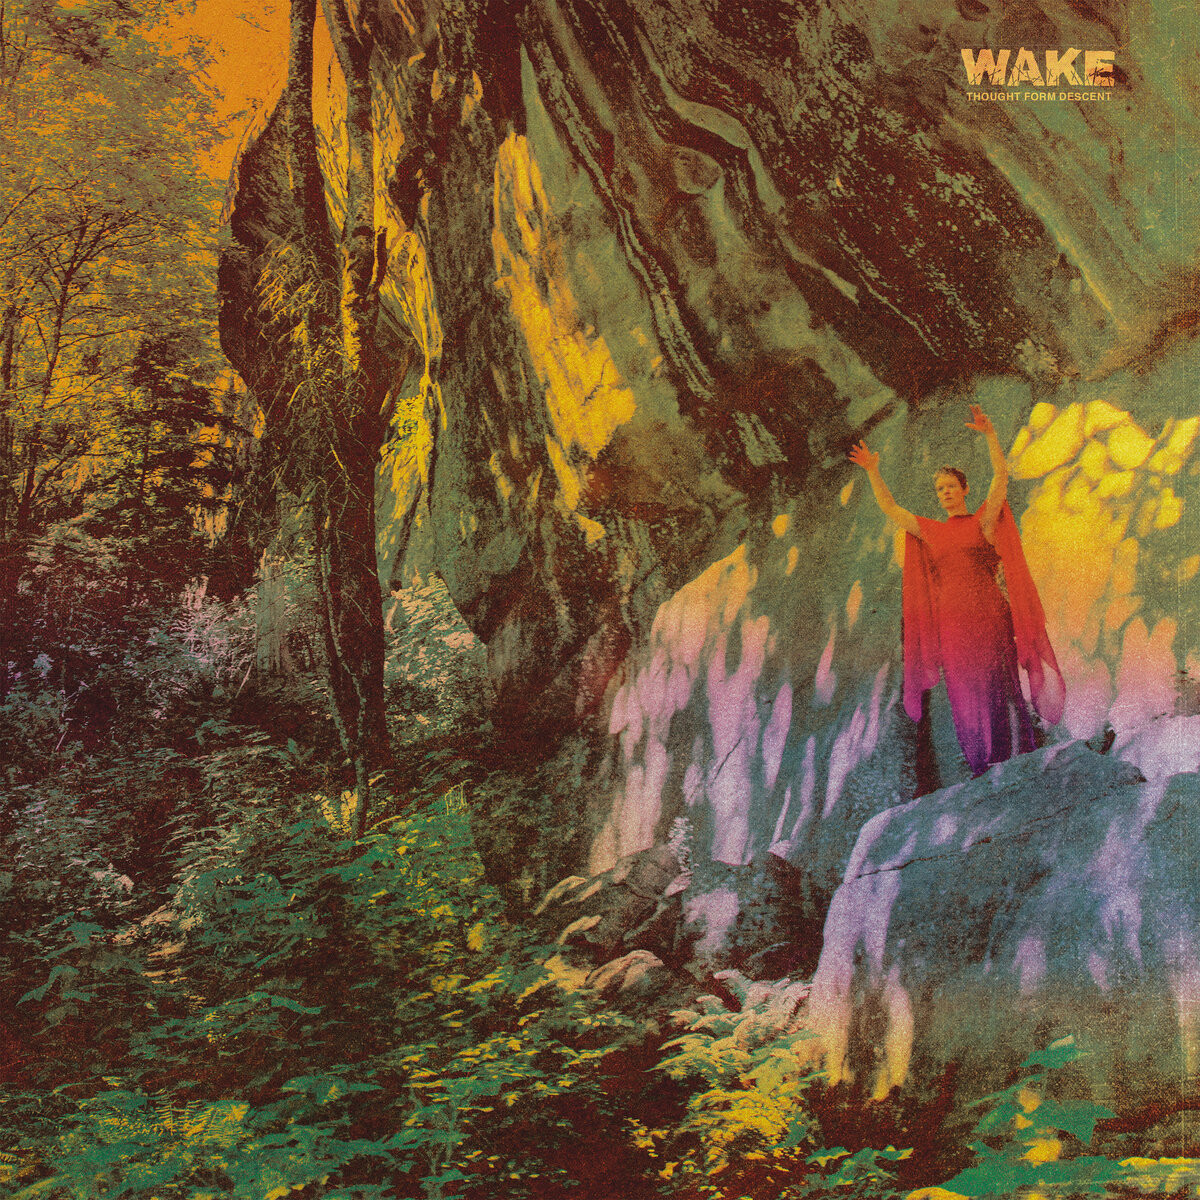 wake-thought-form-descent